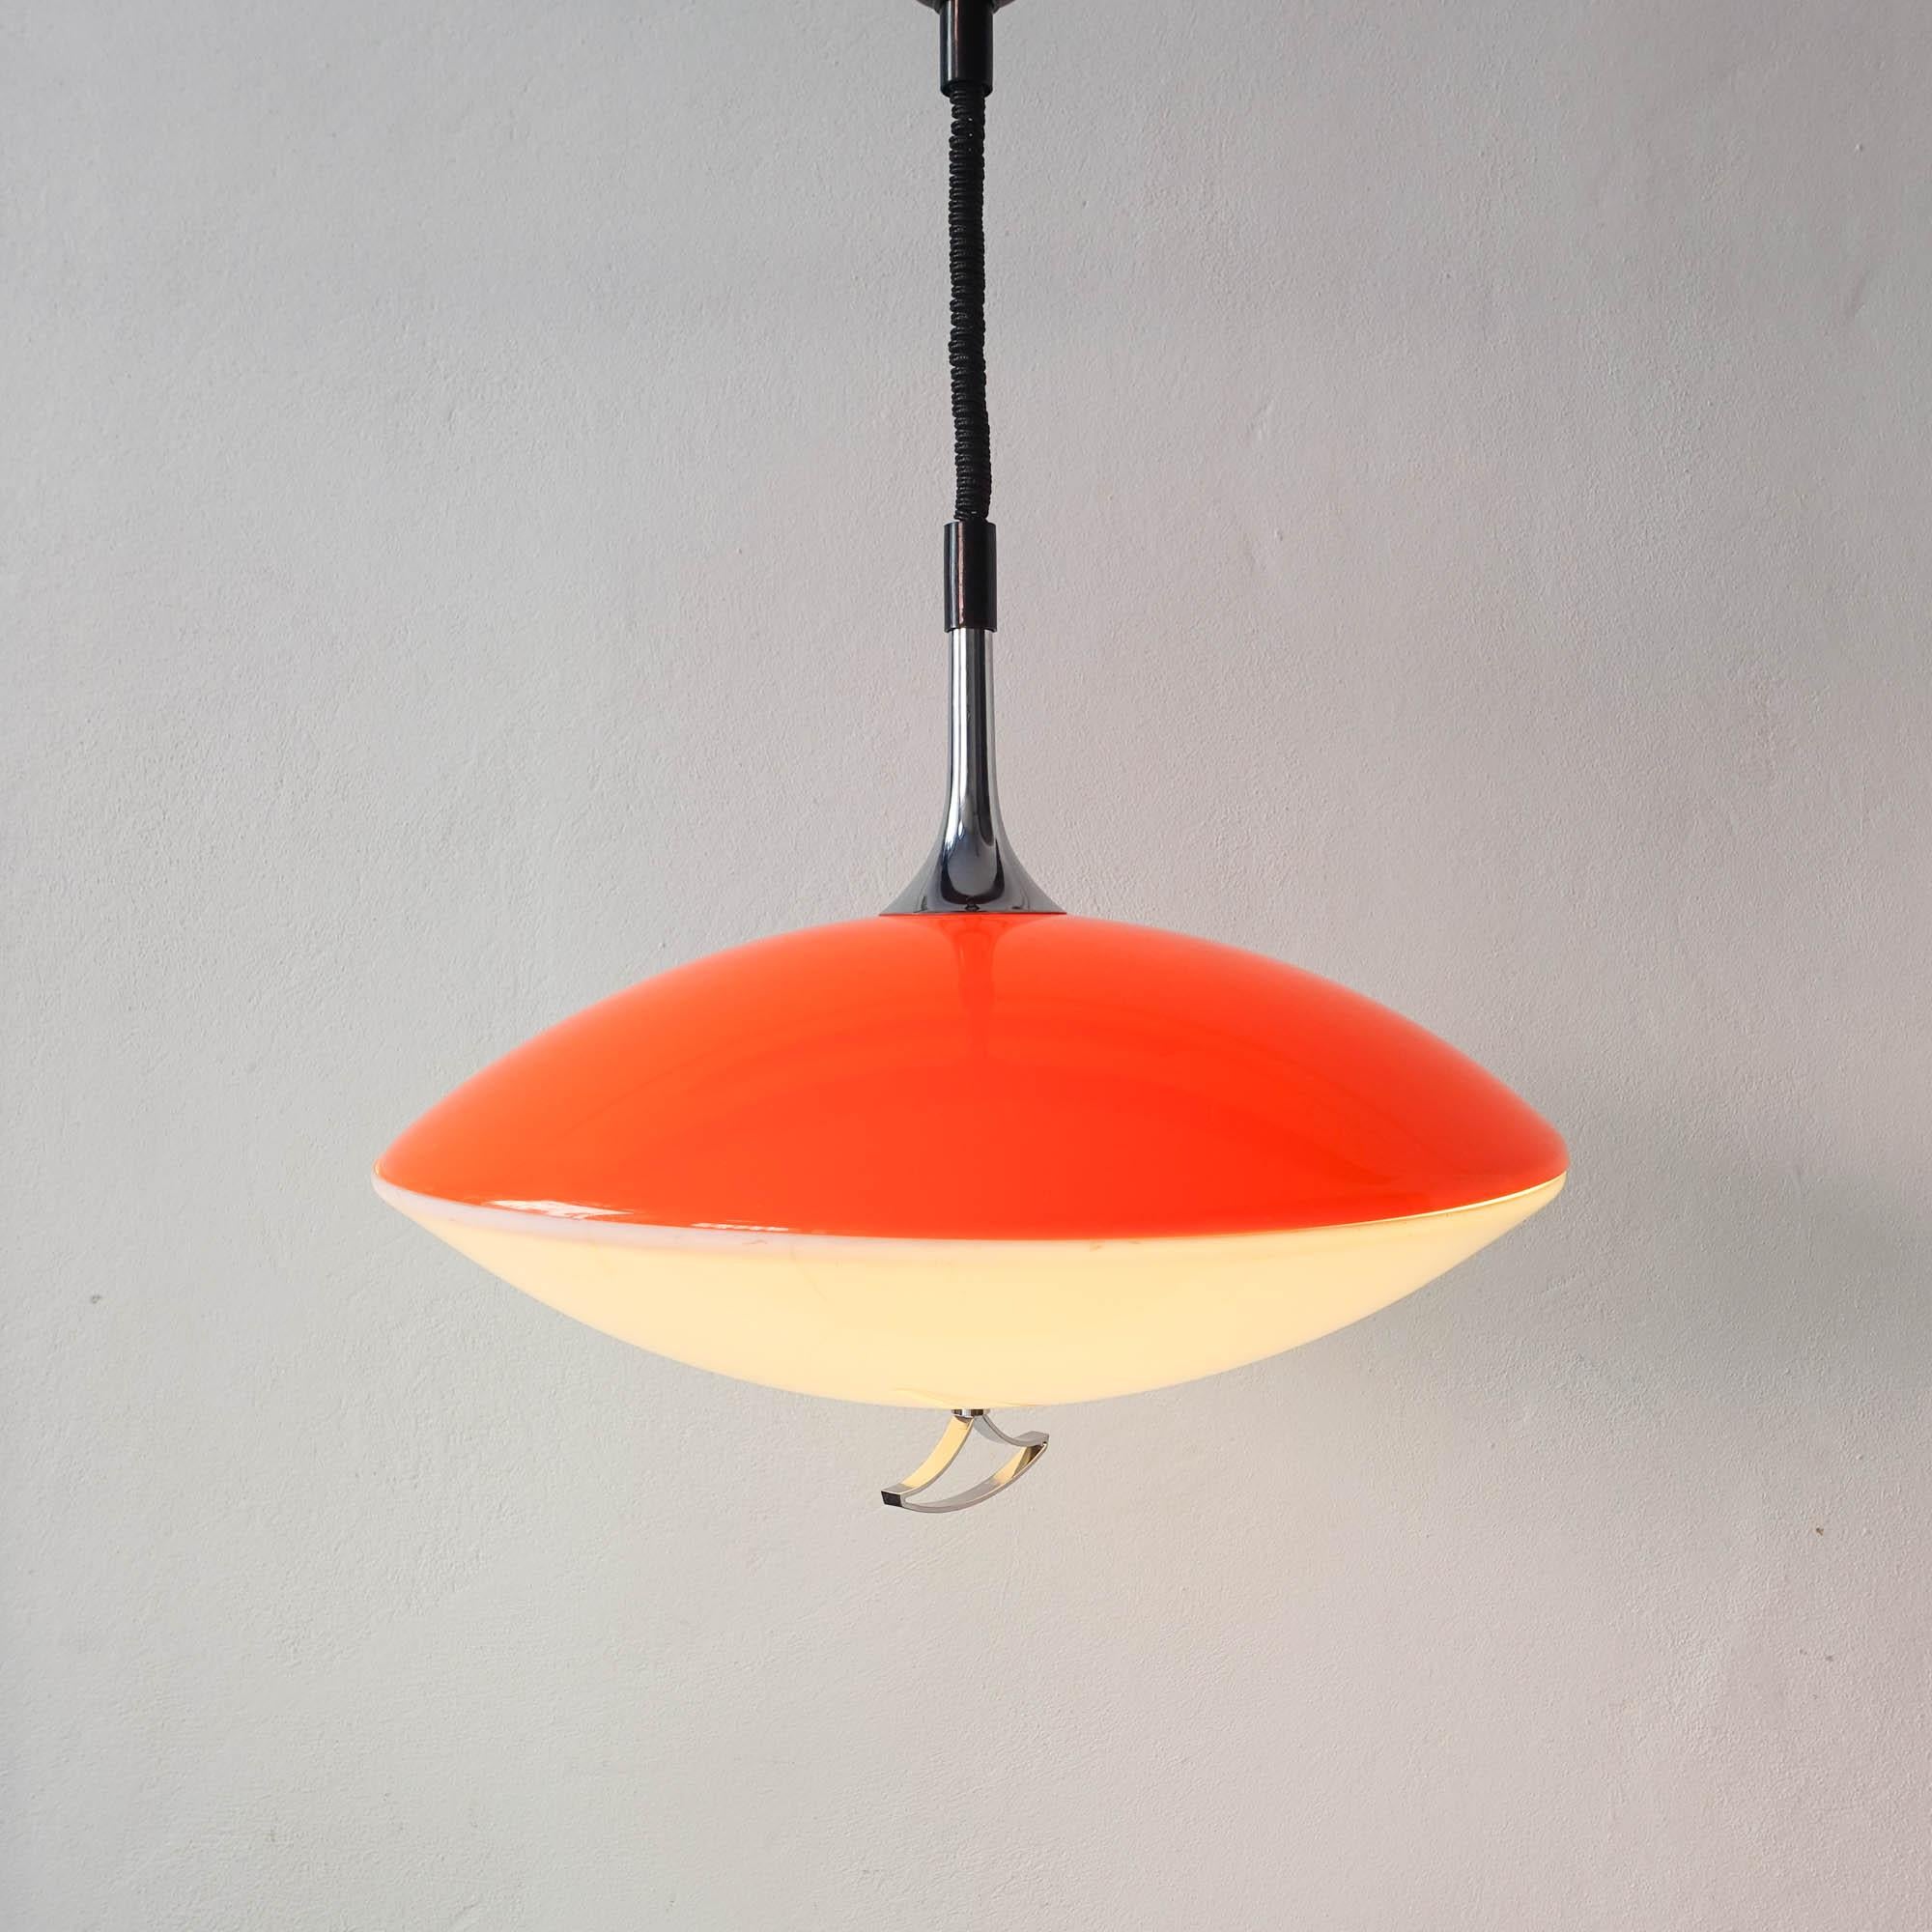 This Space Age UFO pendant lamp was designed and produced in Italy during the 1970's. It has two acrylics, one in orange and other in white, that gives a warm light to the space. With rise and fall mechanism in good condition and a silver pull on